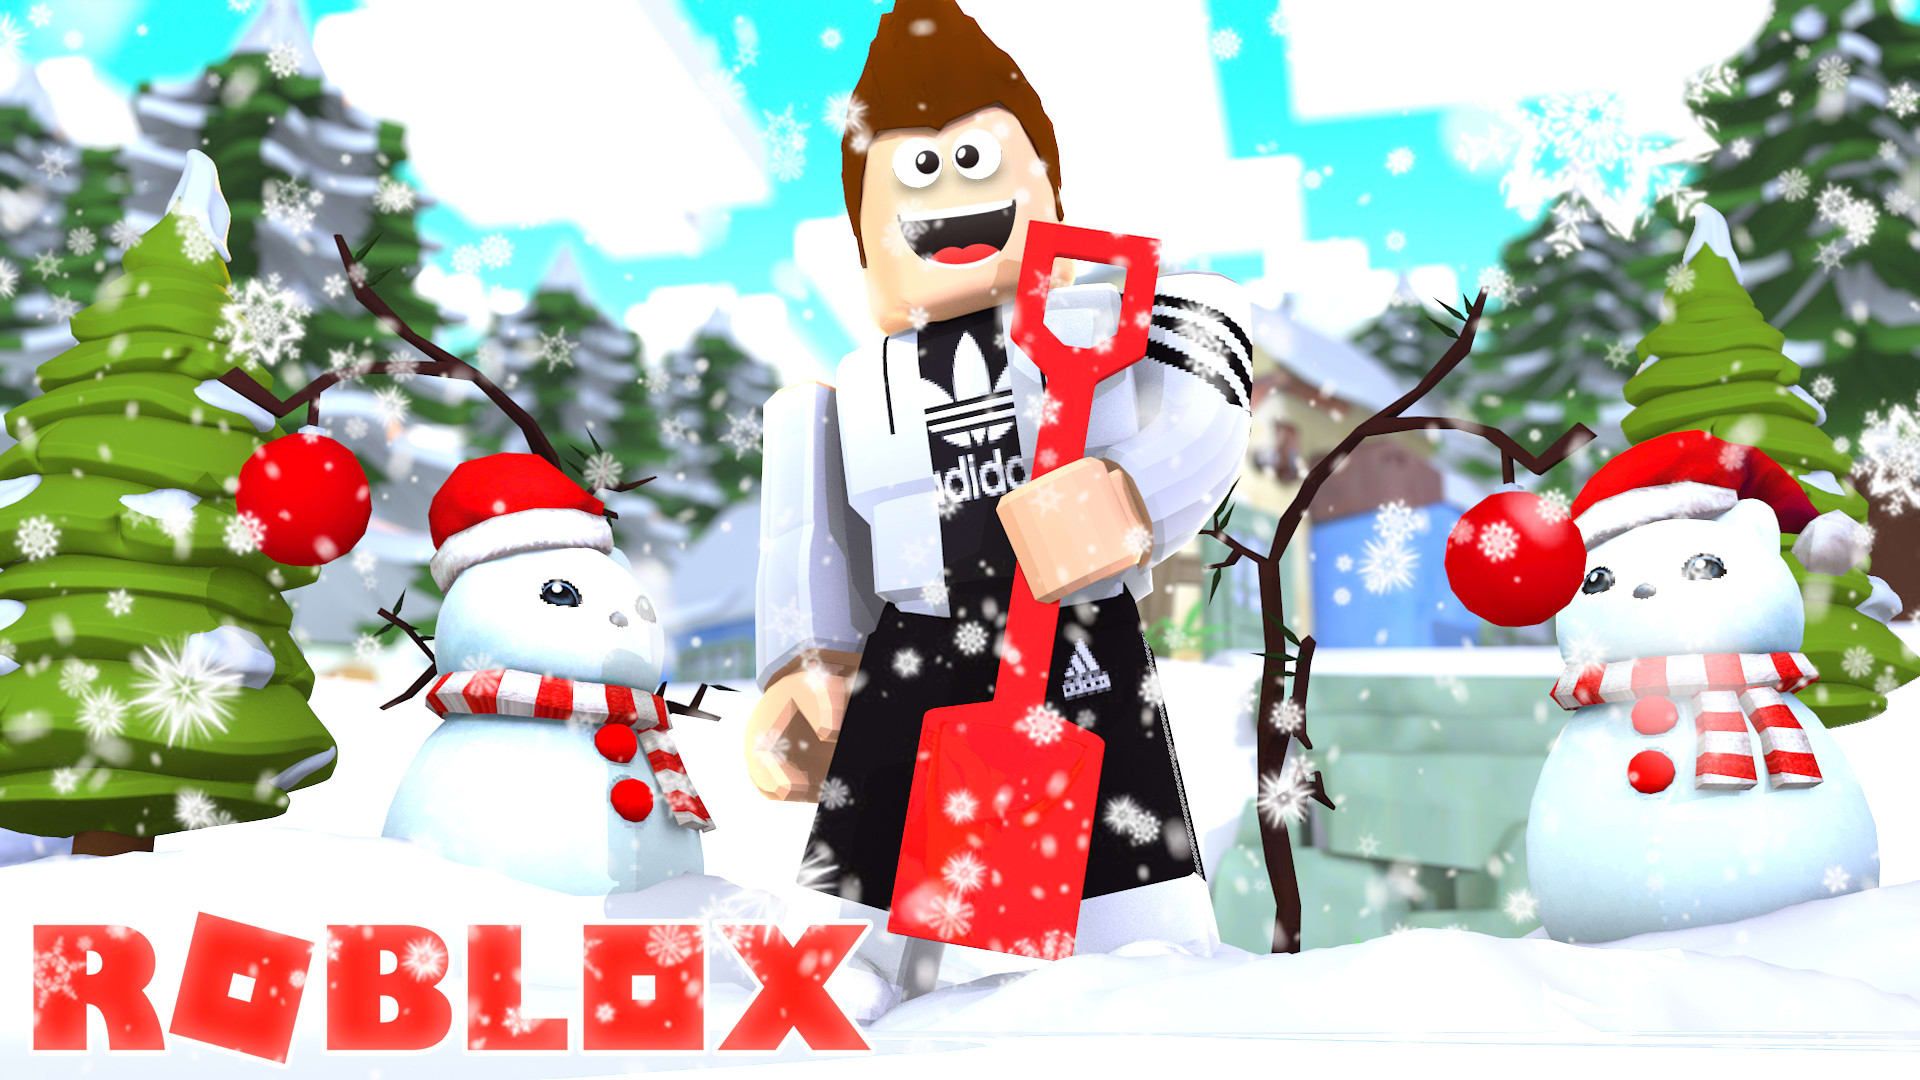 Roblox Christmas Wallpapers Wallpaper Cave - roblox home screen christmaspys